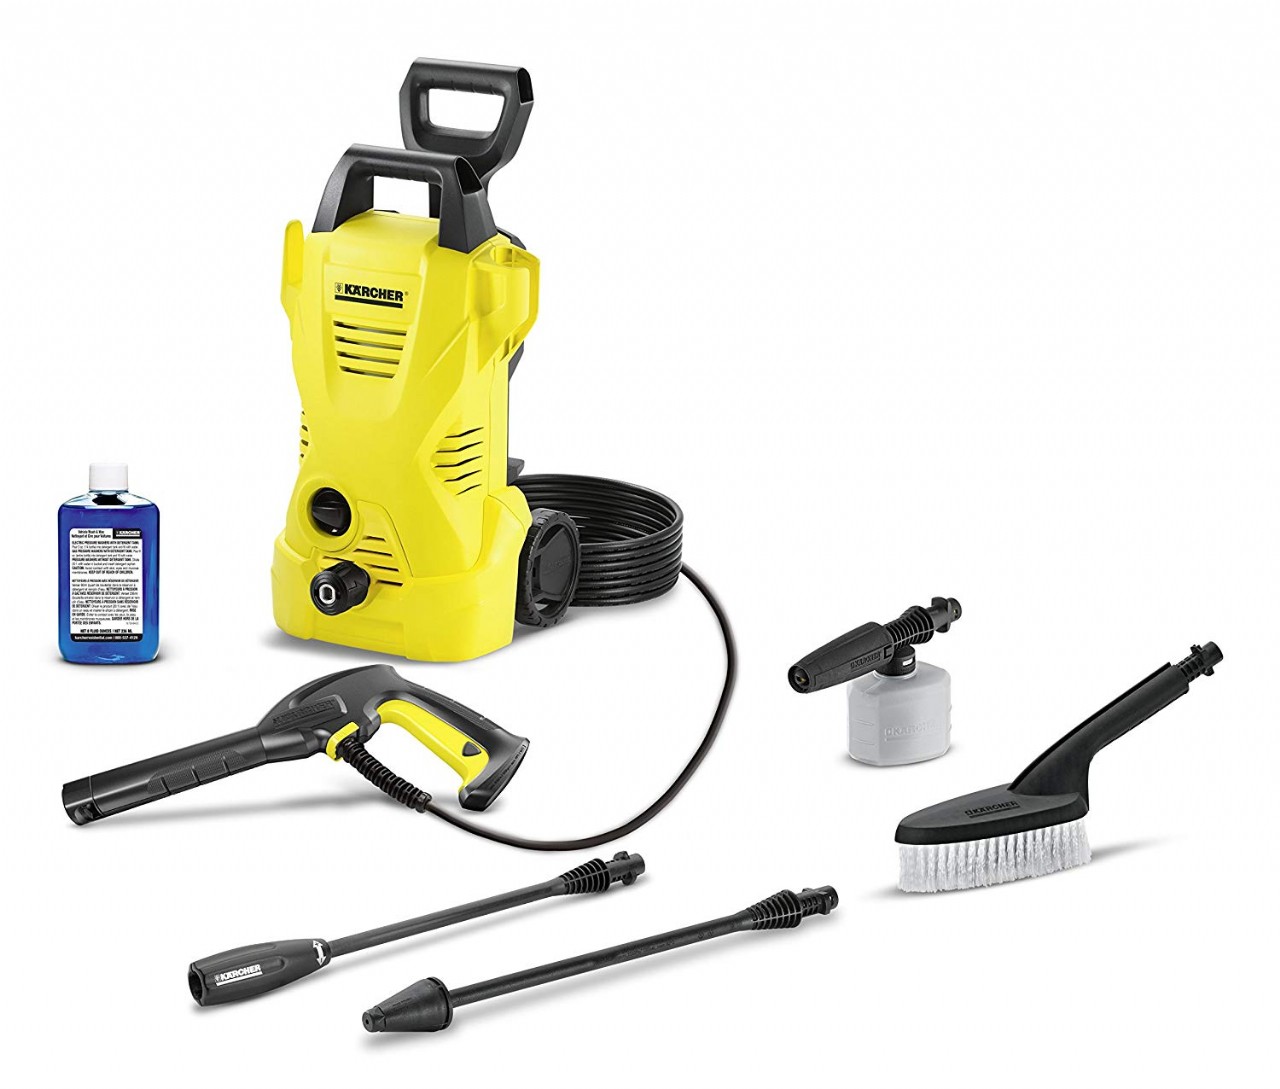 Karcher K2 Car Care Kit Electric Power Pressure Washer, 1600 PSI, 1.25 GPM